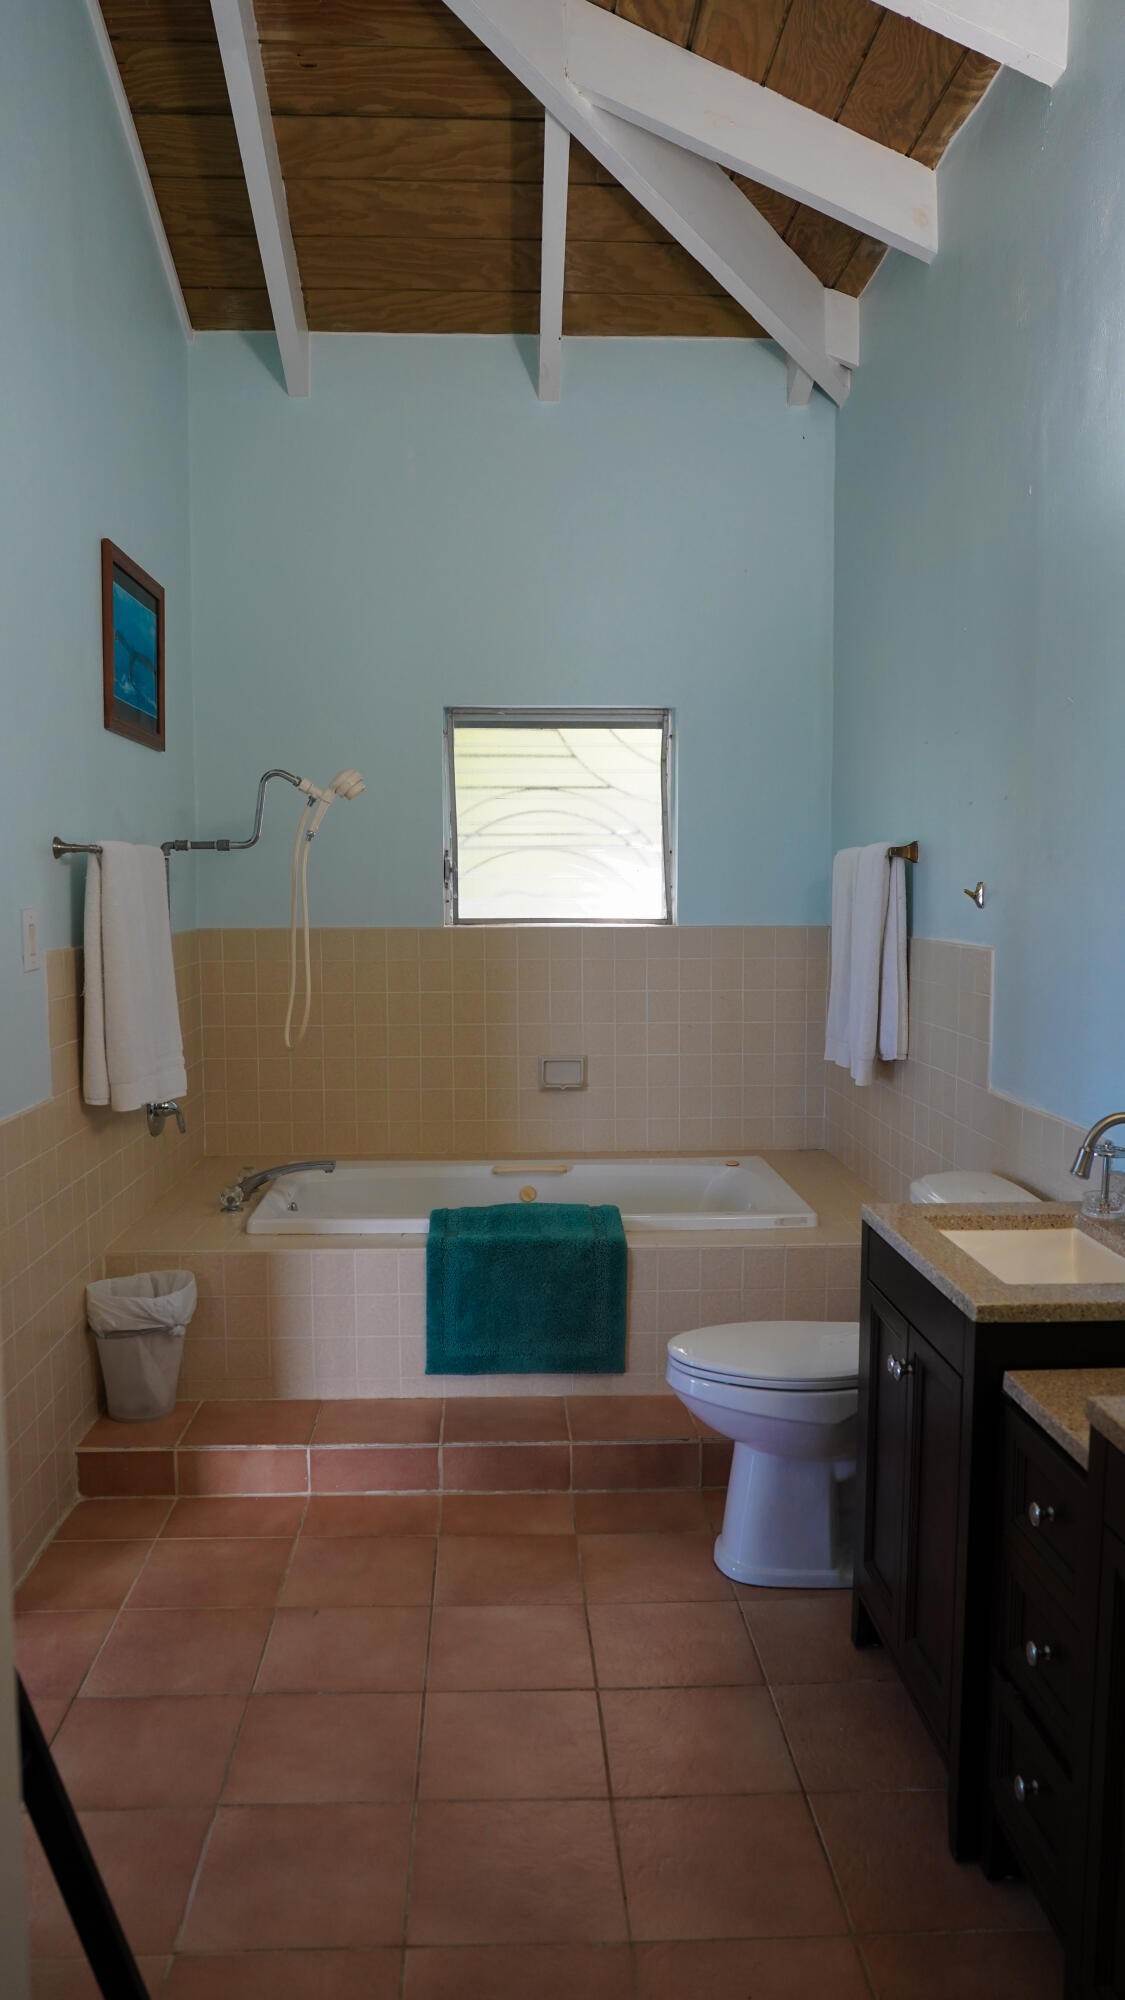 42. Single Family Homes for Sale at 7 AND 9 Altona EA St Croix, Virgin Islands 00820 United States Virgin Islands